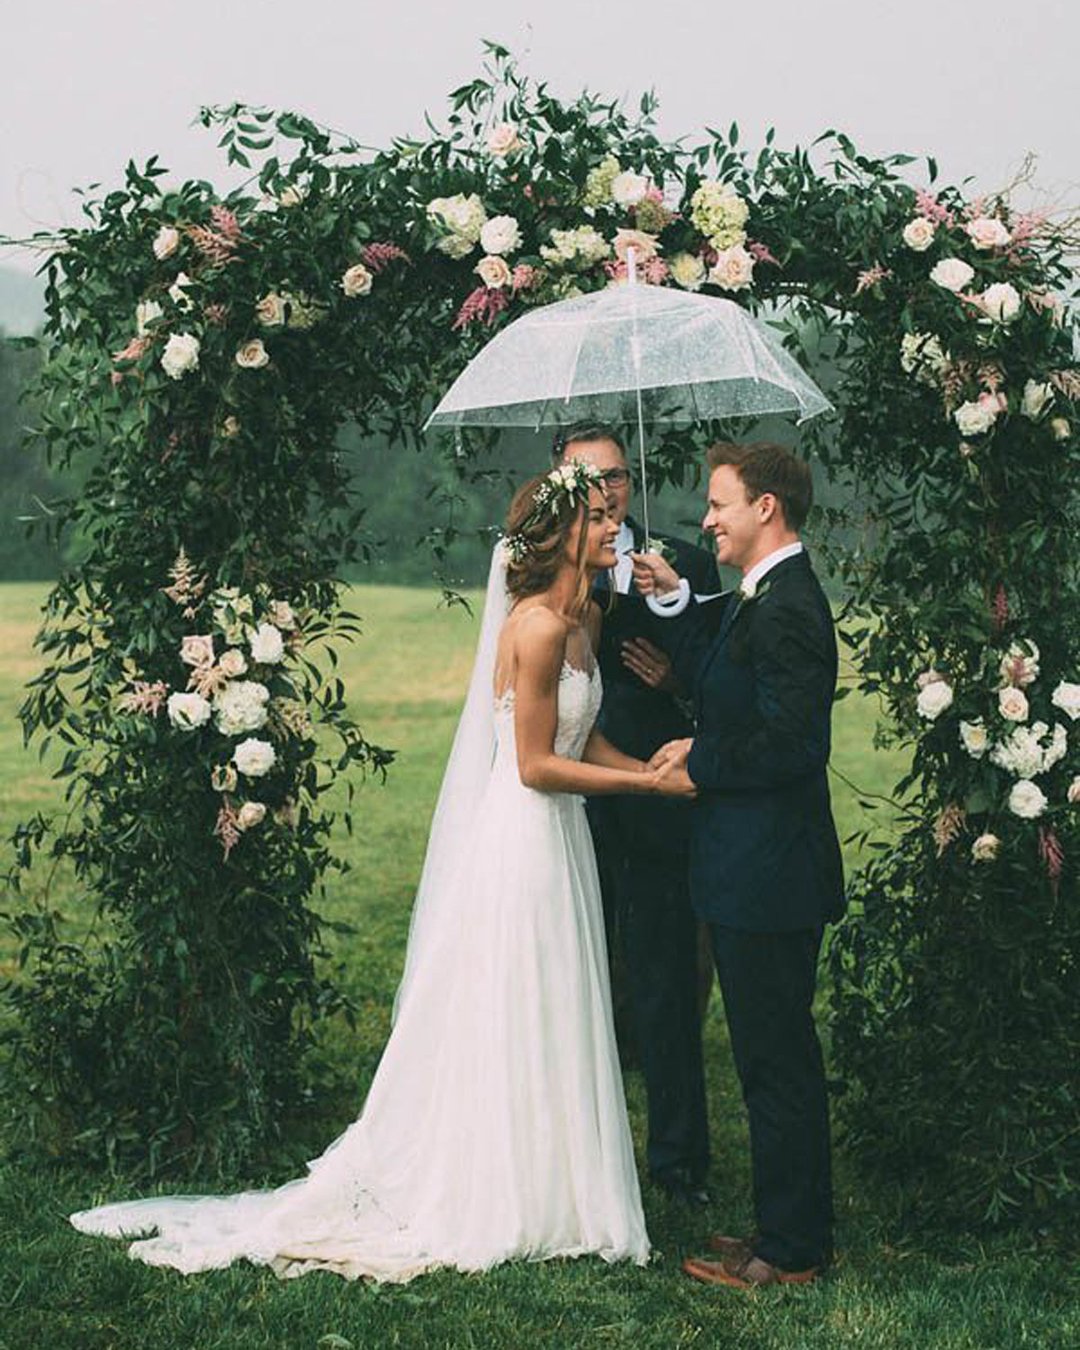 must have wedding photos bride and groom during ceremony near thearch under the rain the image is found